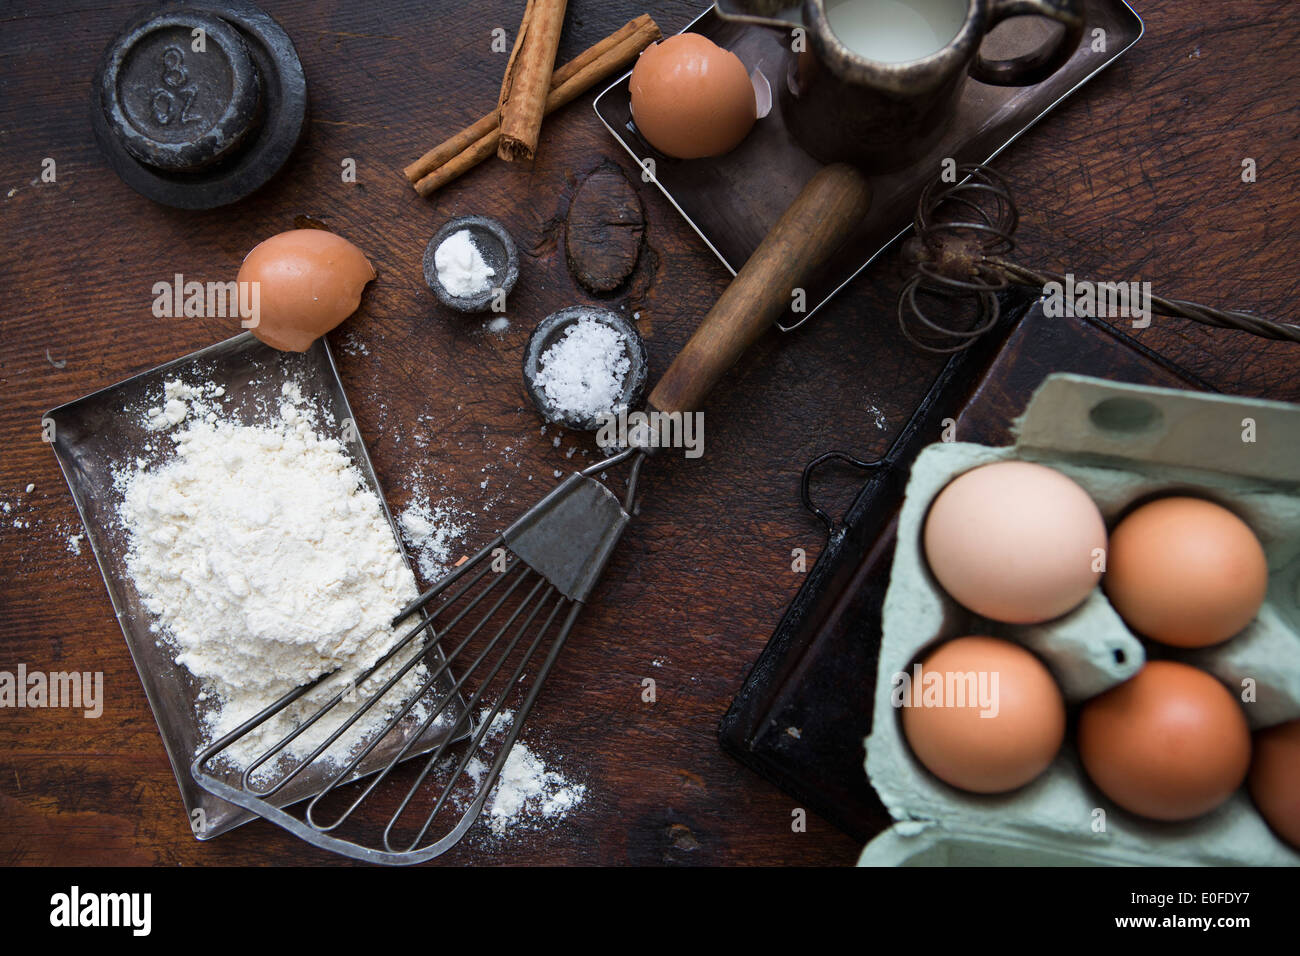 Ingredients for making pancakes, including eggs, flour cinnamon and a batterwhip Stock Photo